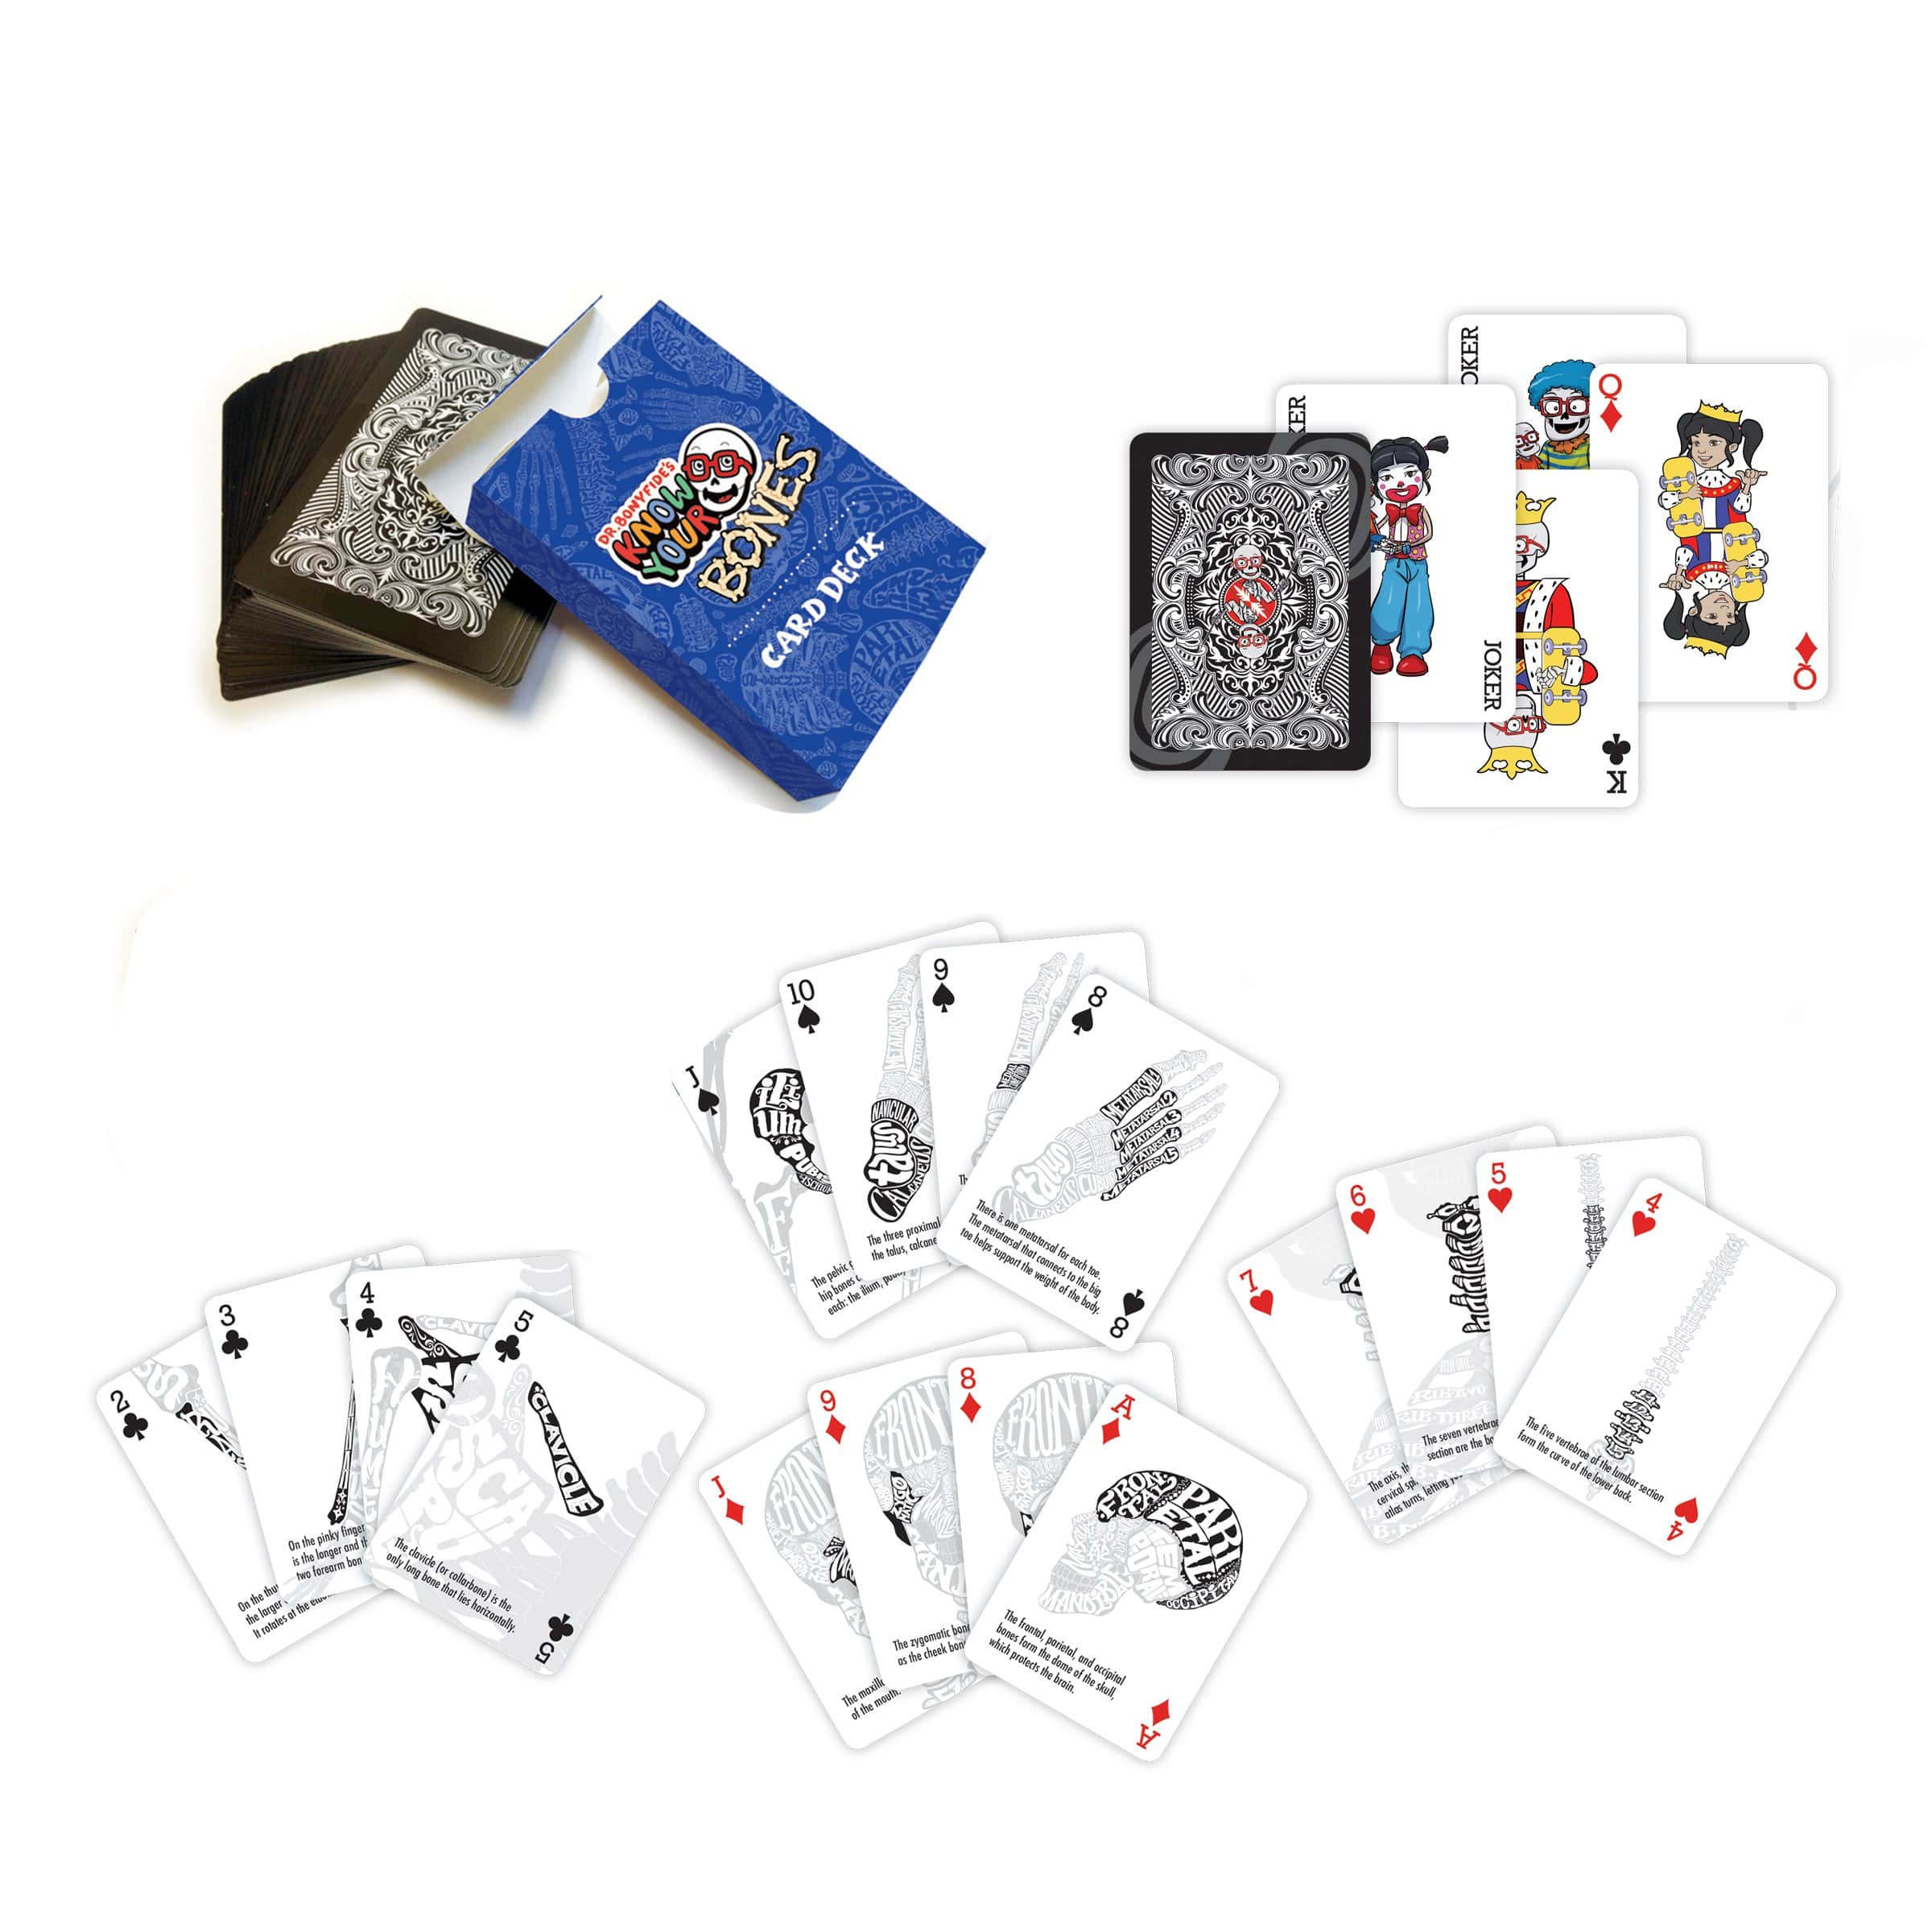 Illustrious Cards and Games